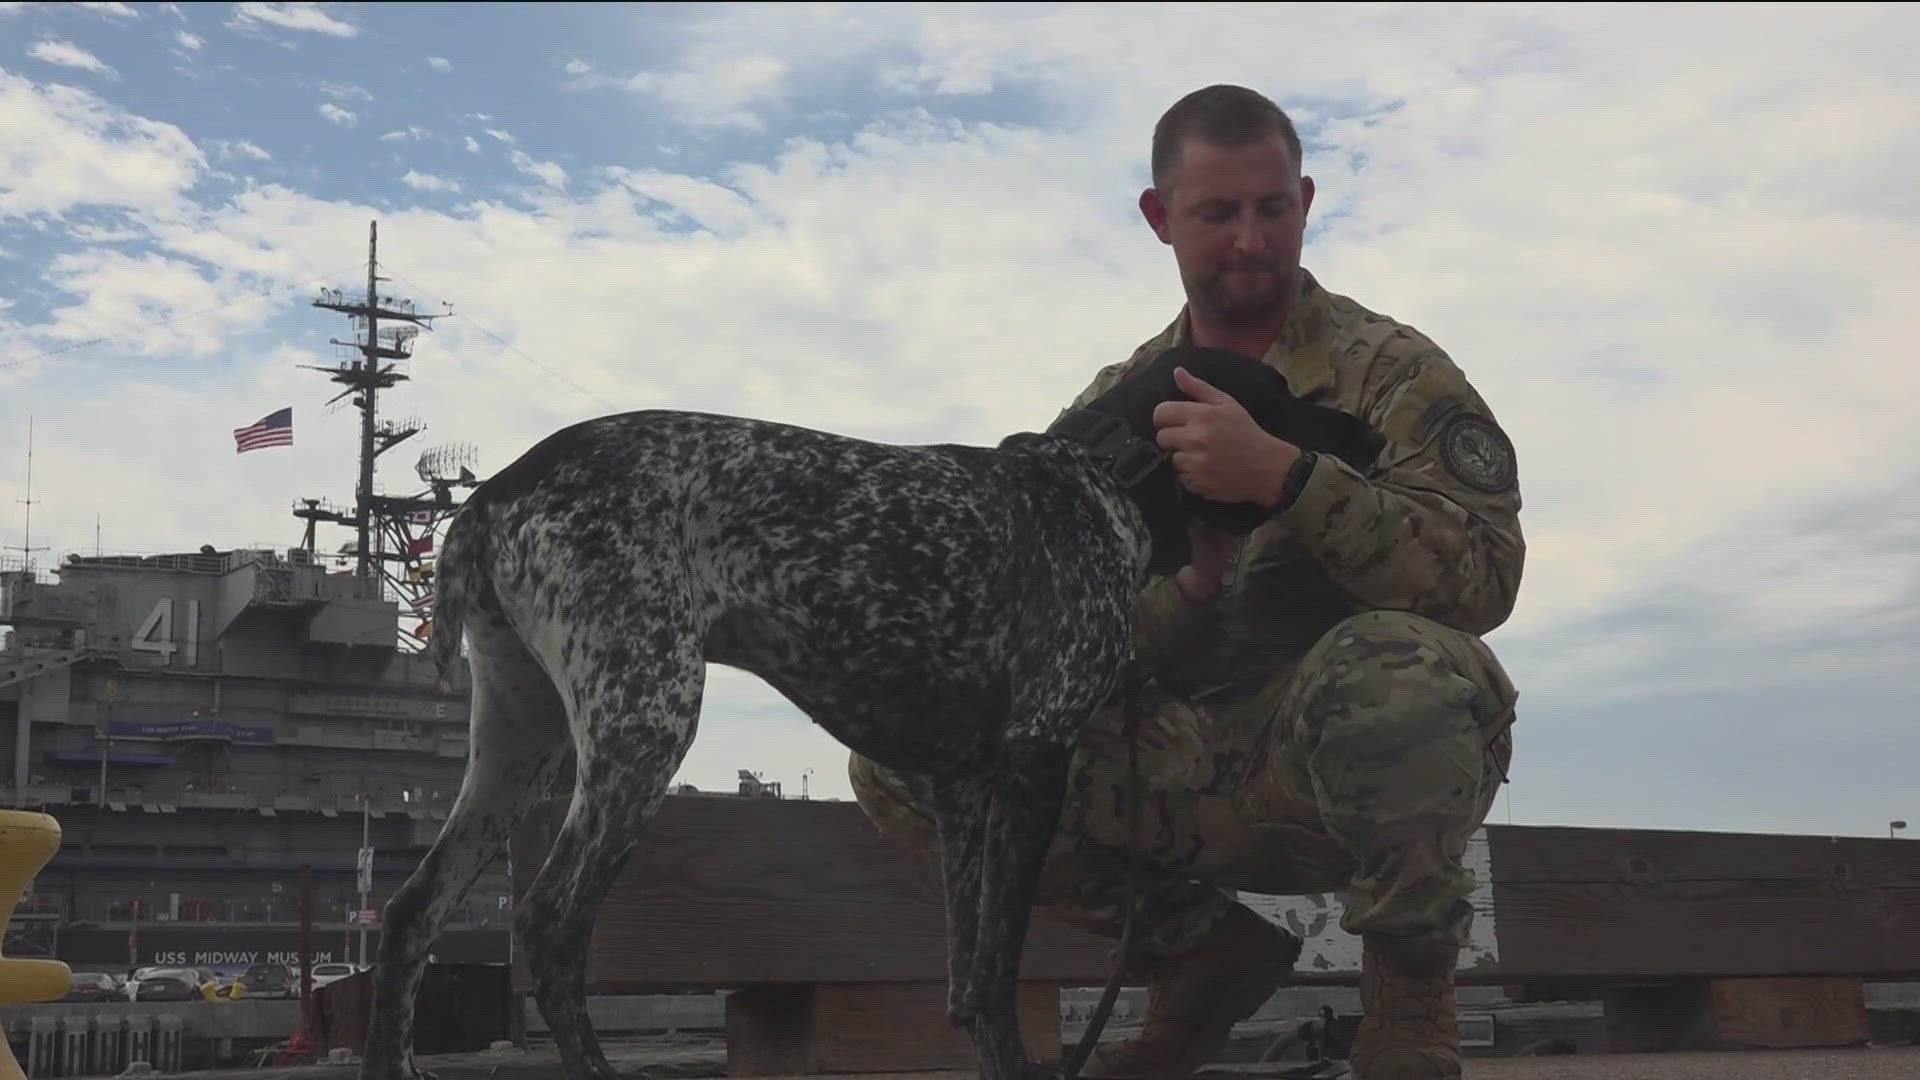 Chief Buda, the explosive detection K-9 in the U.S. Coast Guard earned top dog recognition in the military category for the American Humane Hero Dog Awards,